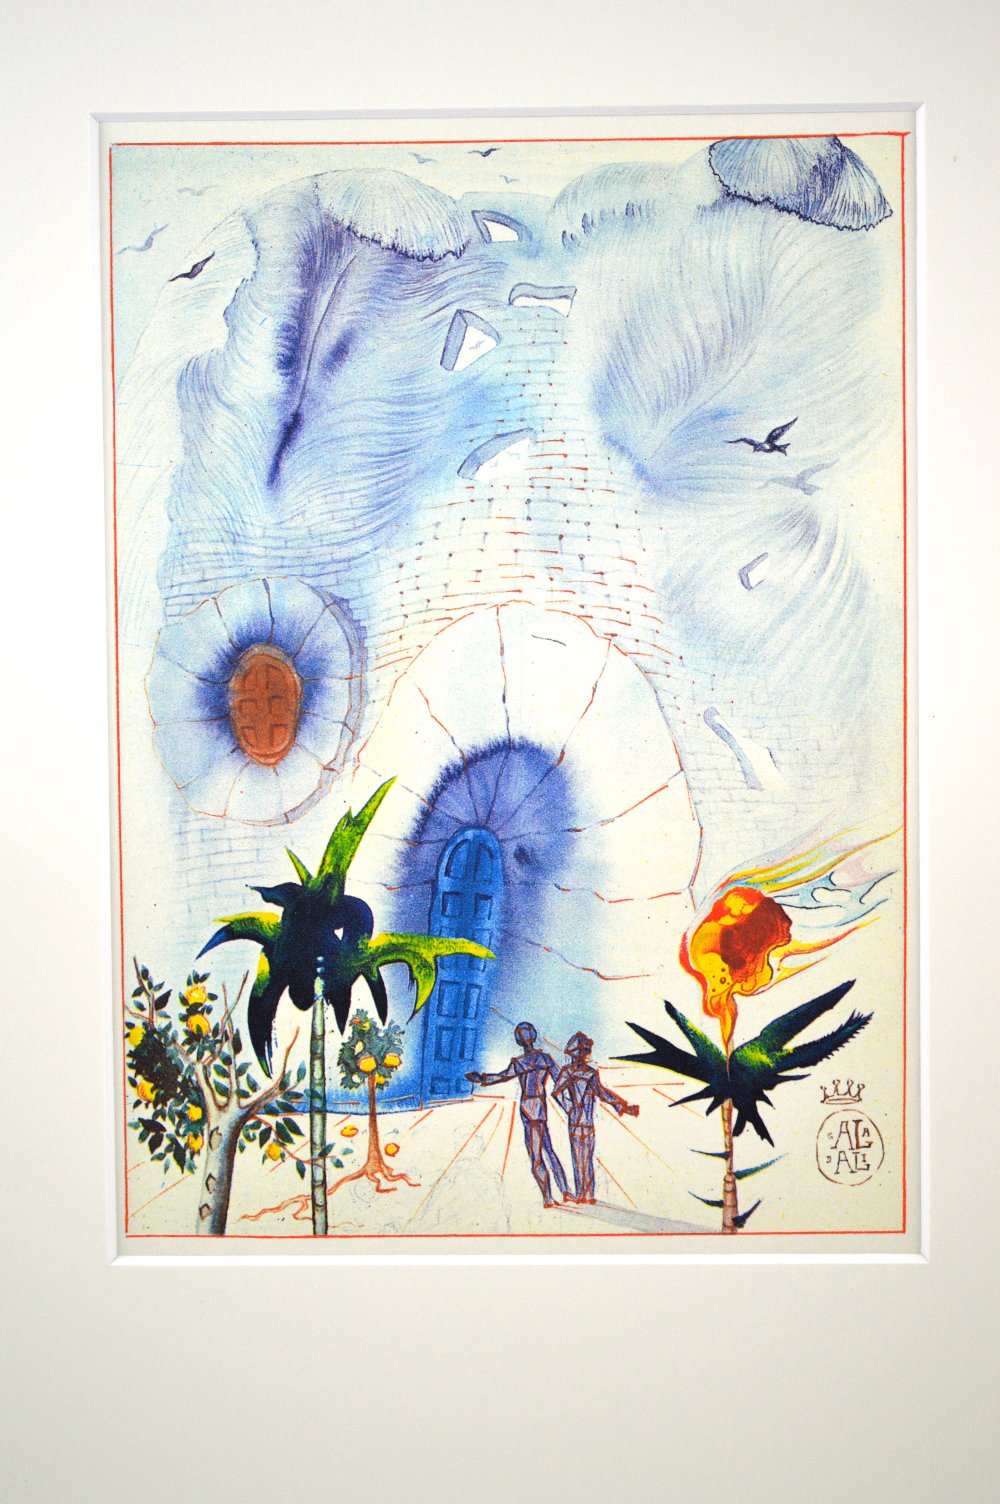 Salvador Dali 1-2500 worldwide lithograph ltd Edition, Certificate of authenticty included